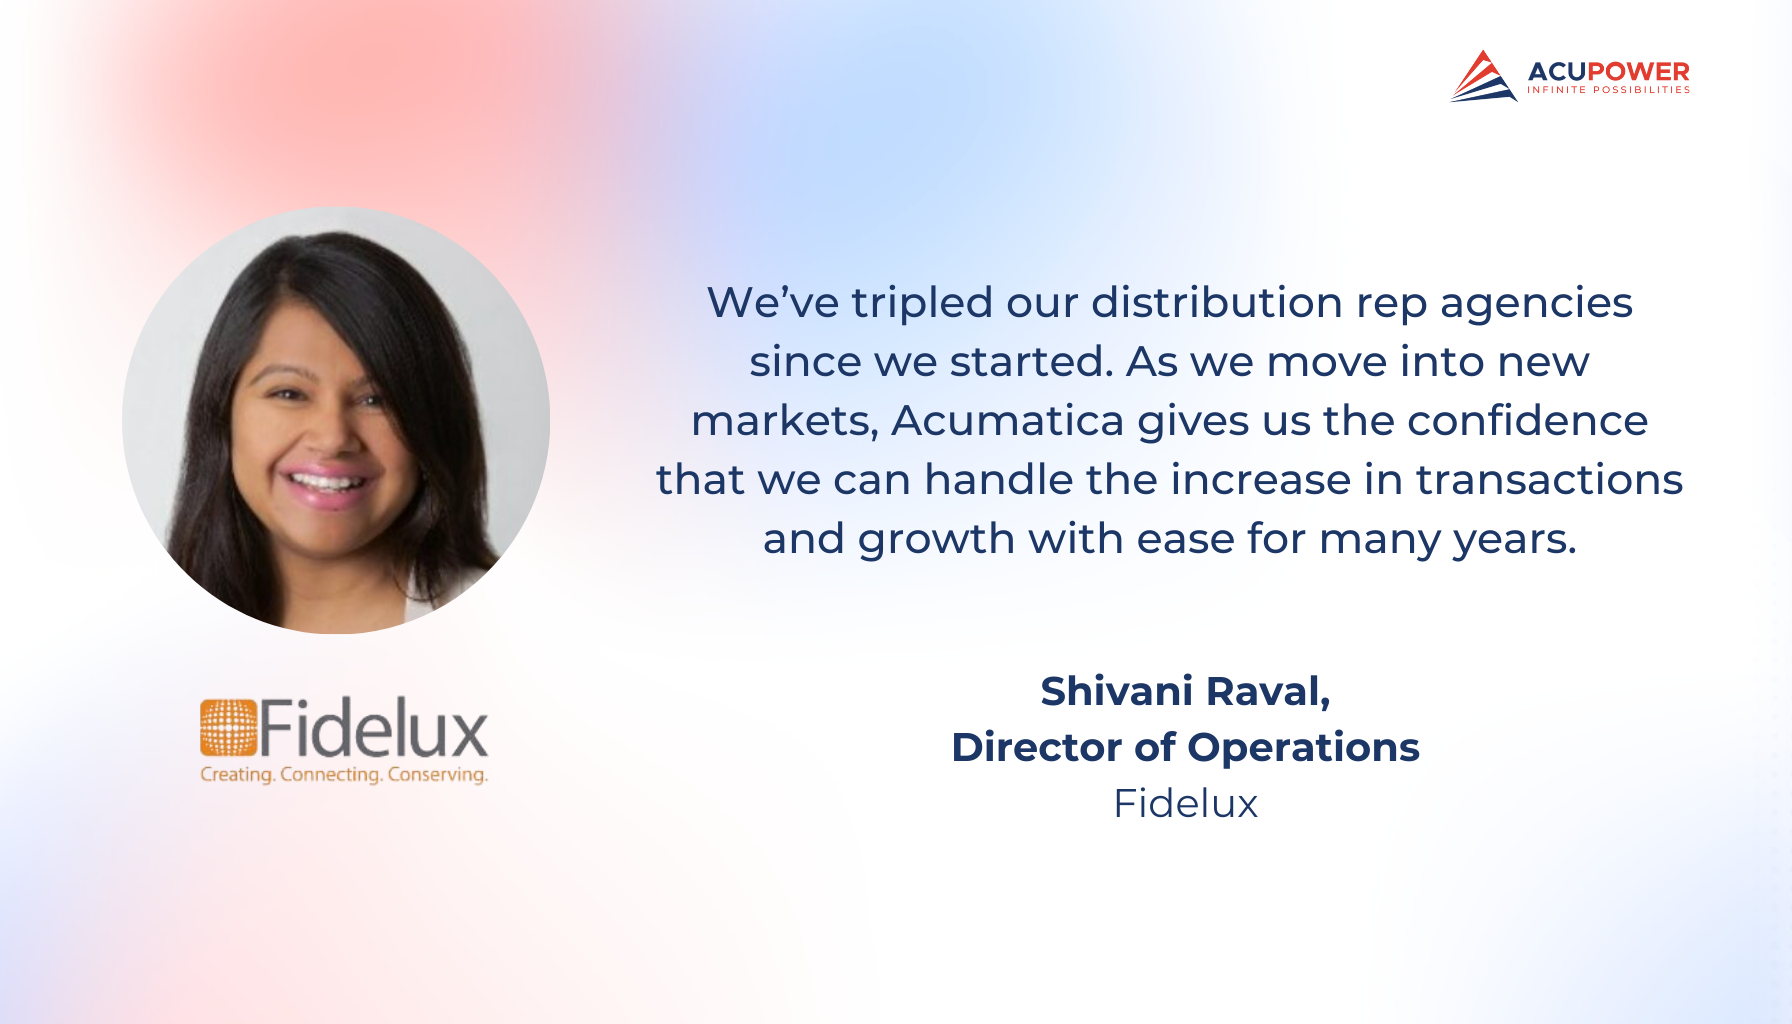 A quote of Shivani Raval, Director of Operations of Fidelux. We’ve tripled our distribution rep agencies since we started. As we move into new markets, Acumatica gives us the confidence that we can handle the increase in transactions and growth with ease for many years.